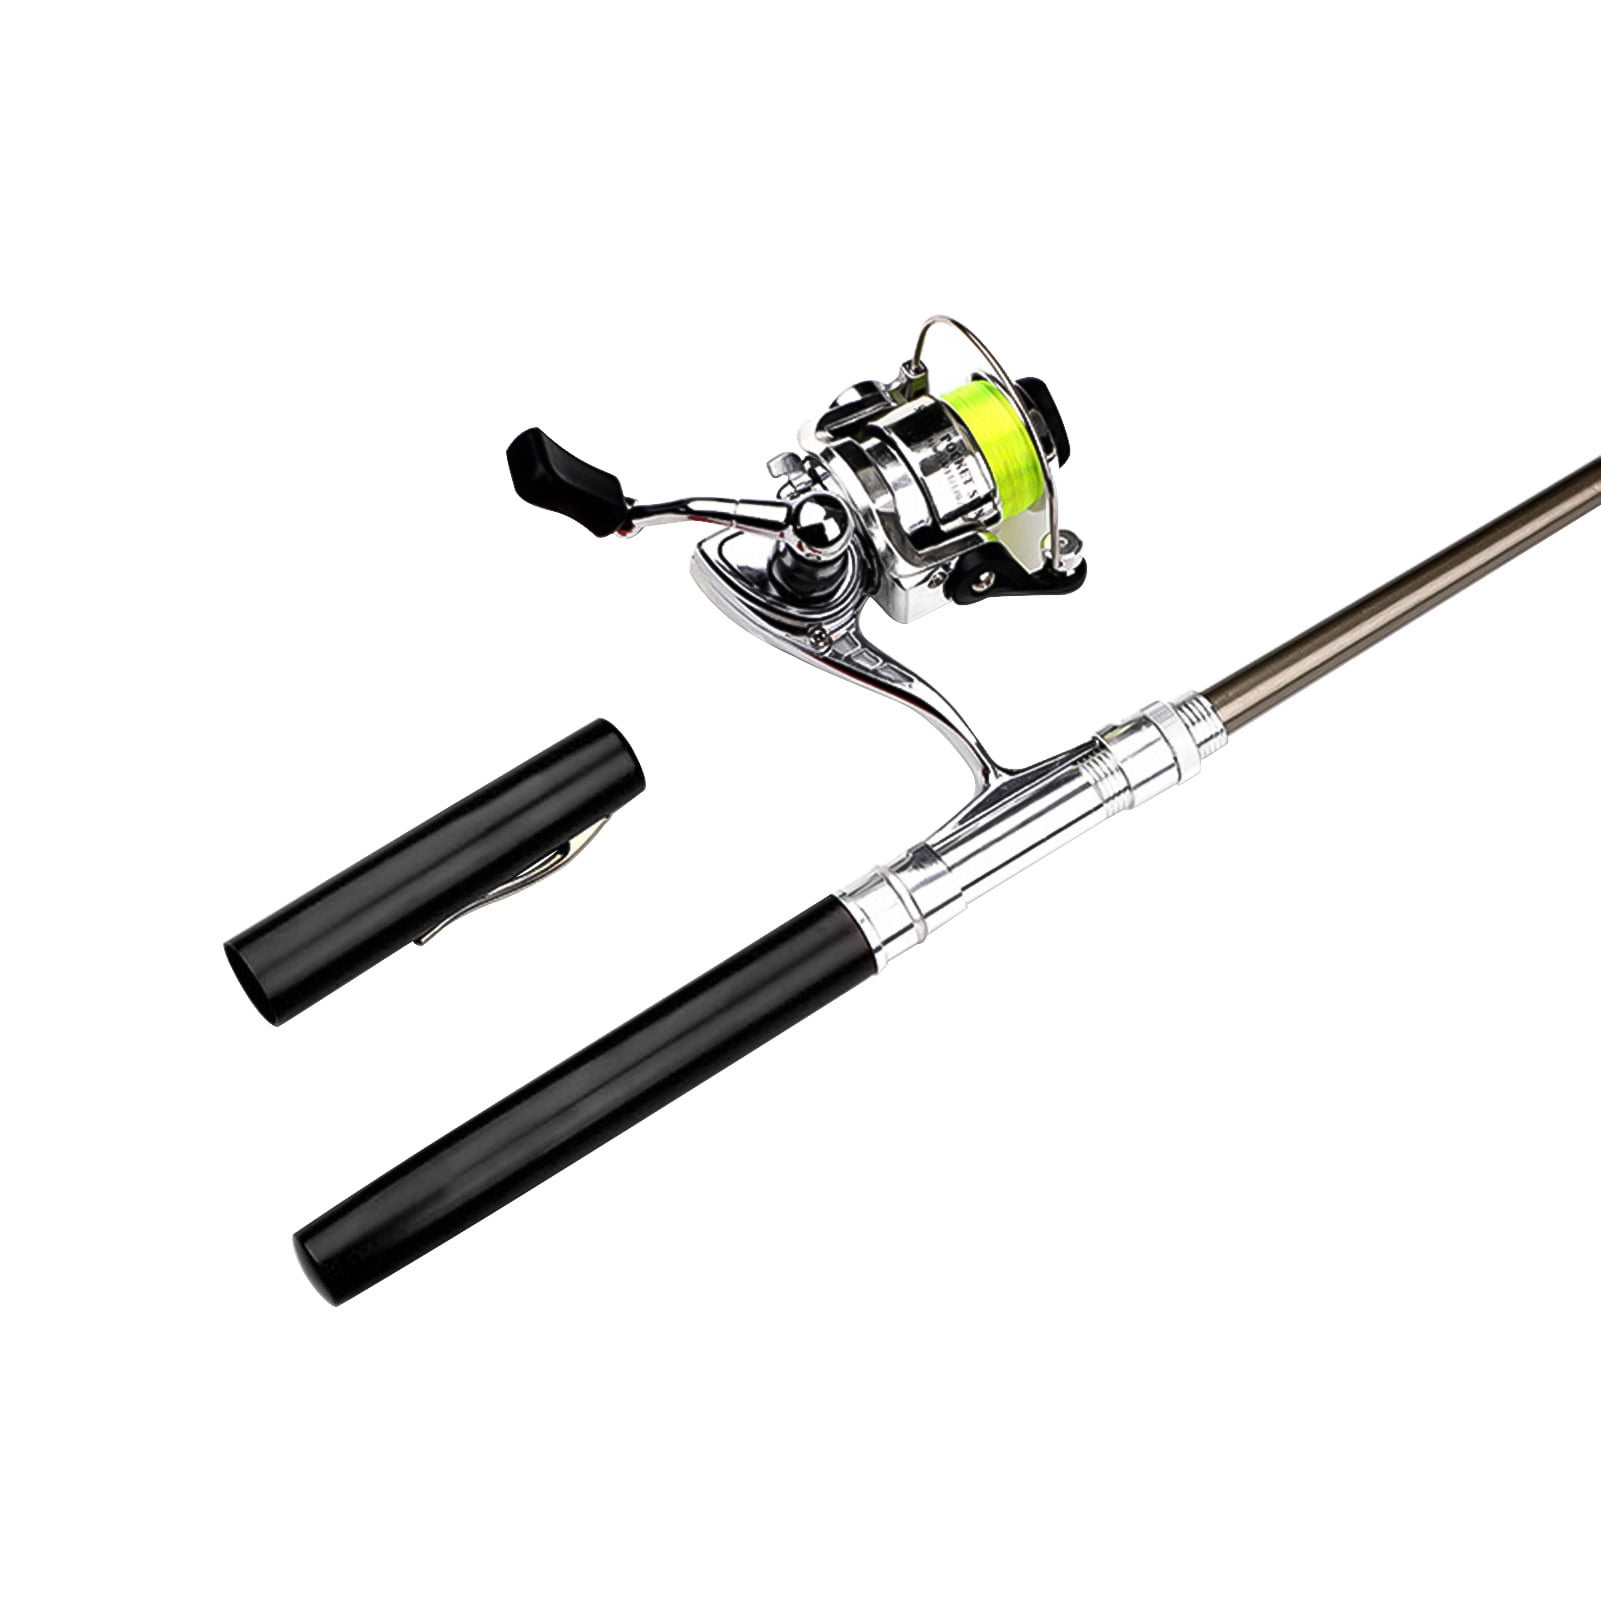 EMMRAGNO Portable Pocket Telescopic 38inch Mini Pen Fishing Rod and Reel  Combos, Small Pen Fishing Pole with Reel Line Bait Hook, for River, Lake,  Ice Fishing and So On, Rod & Reel